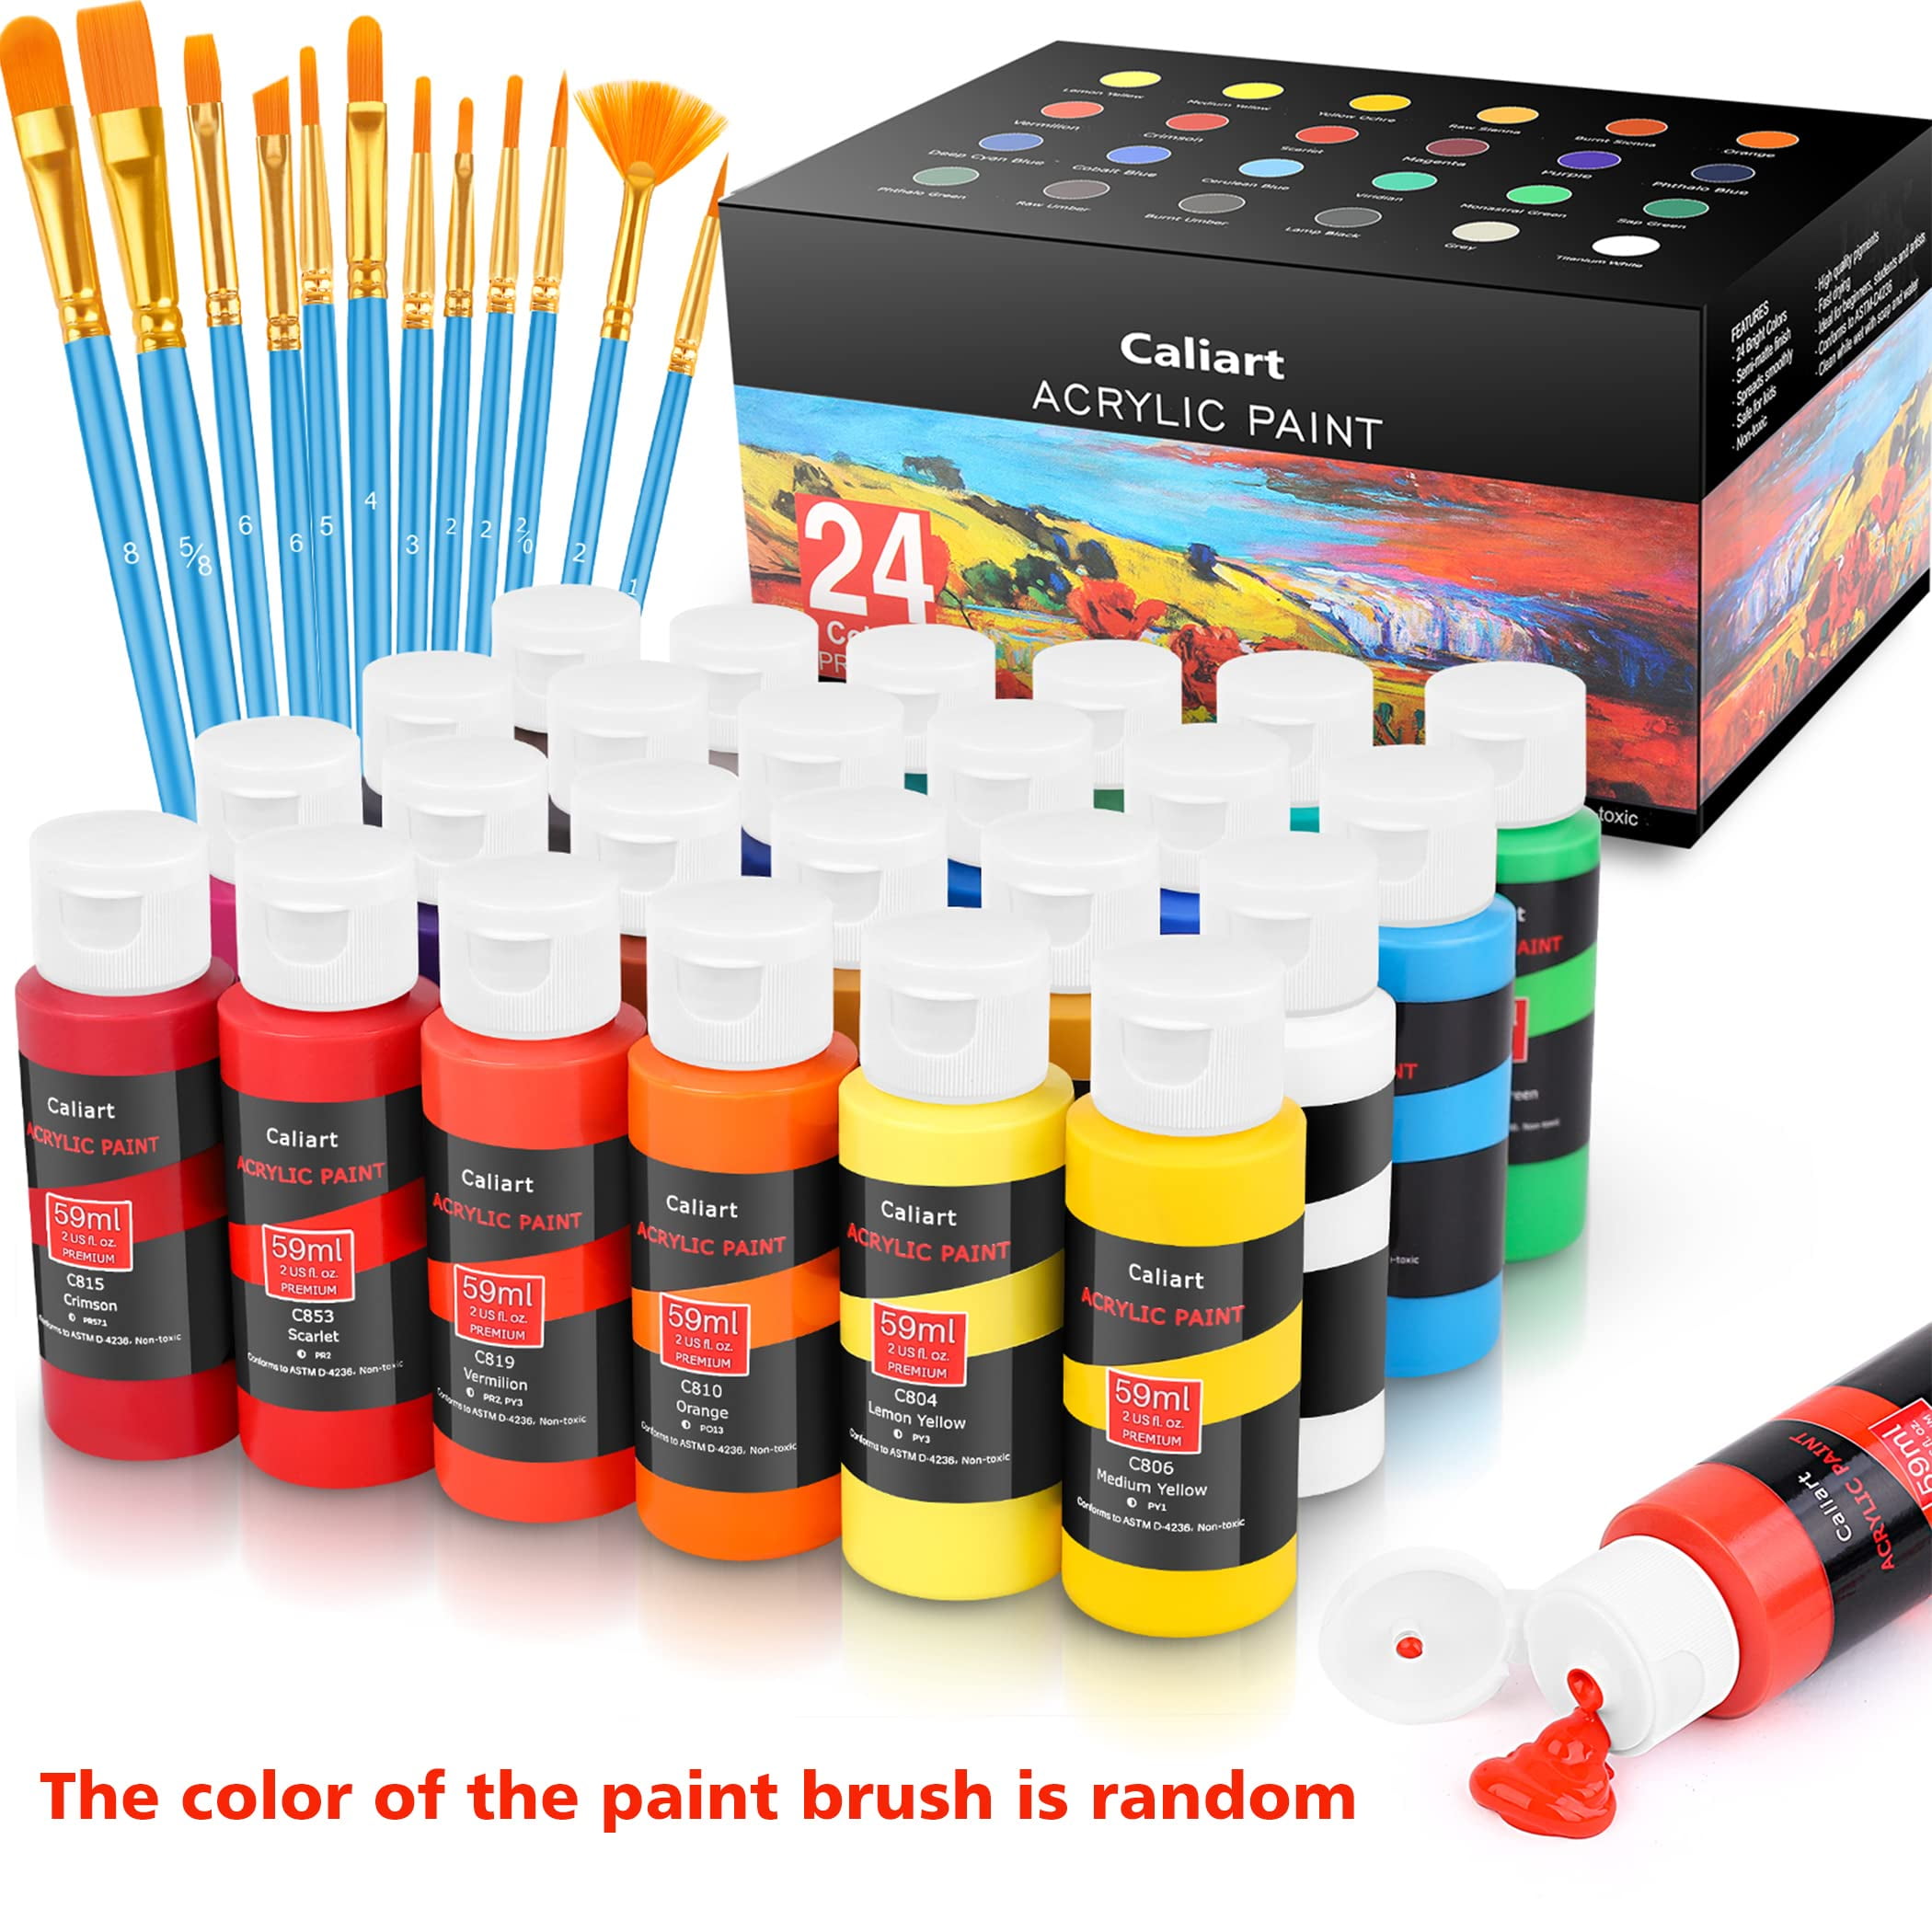 Acrylic Paint Set for Adults and Kids - 12 Pack of 12mL Paints with 3 Art  Brushes, Non-Toxic Craft Paint, Halloween Pumpkin Painting Kit - Canvas